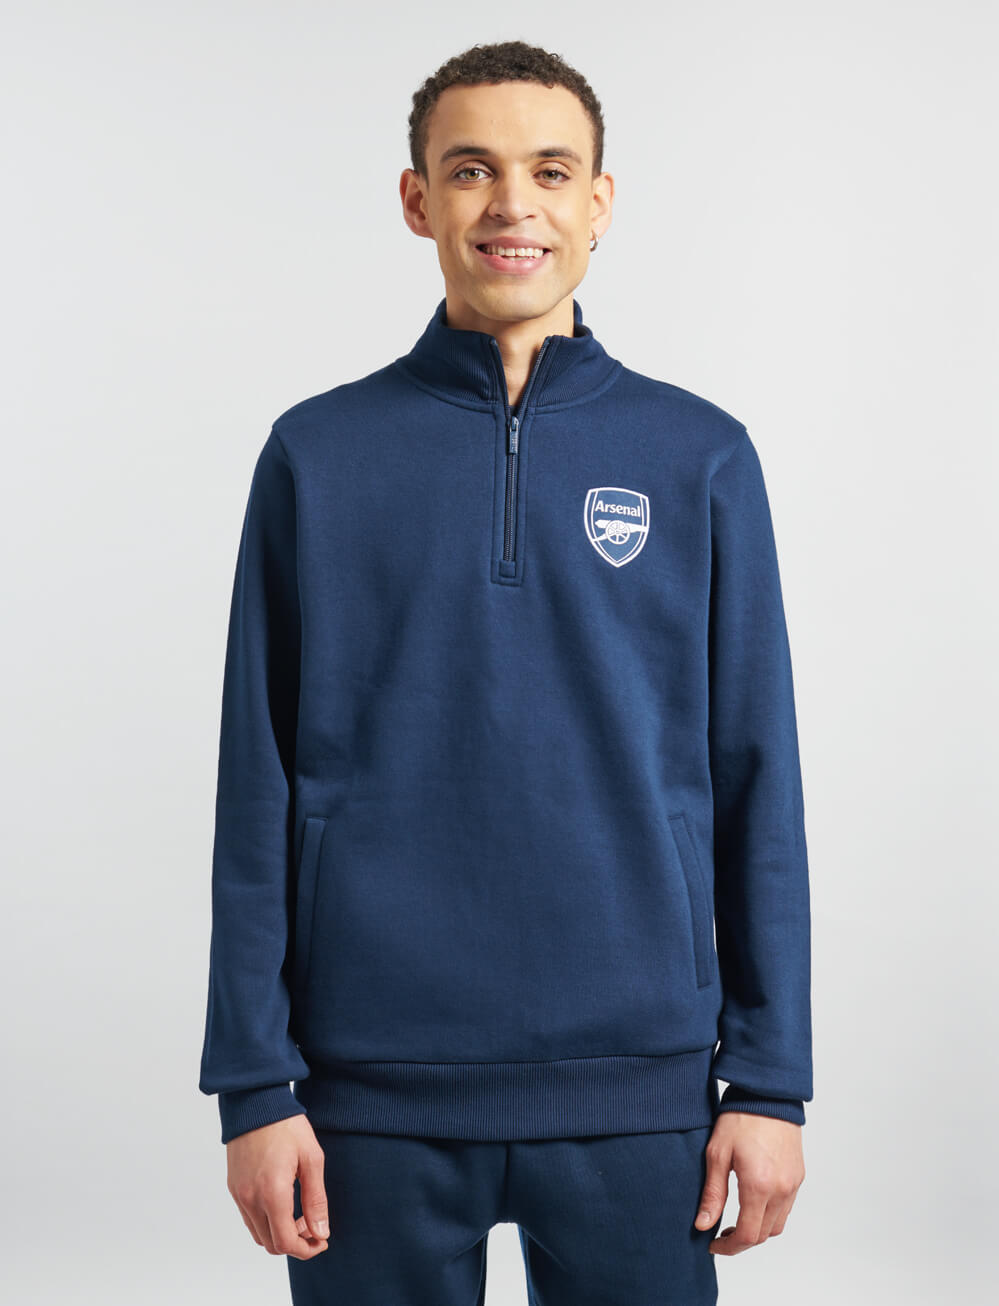 Official Arsenal 1/4 Zip Sweat - Navy - The World Football Store